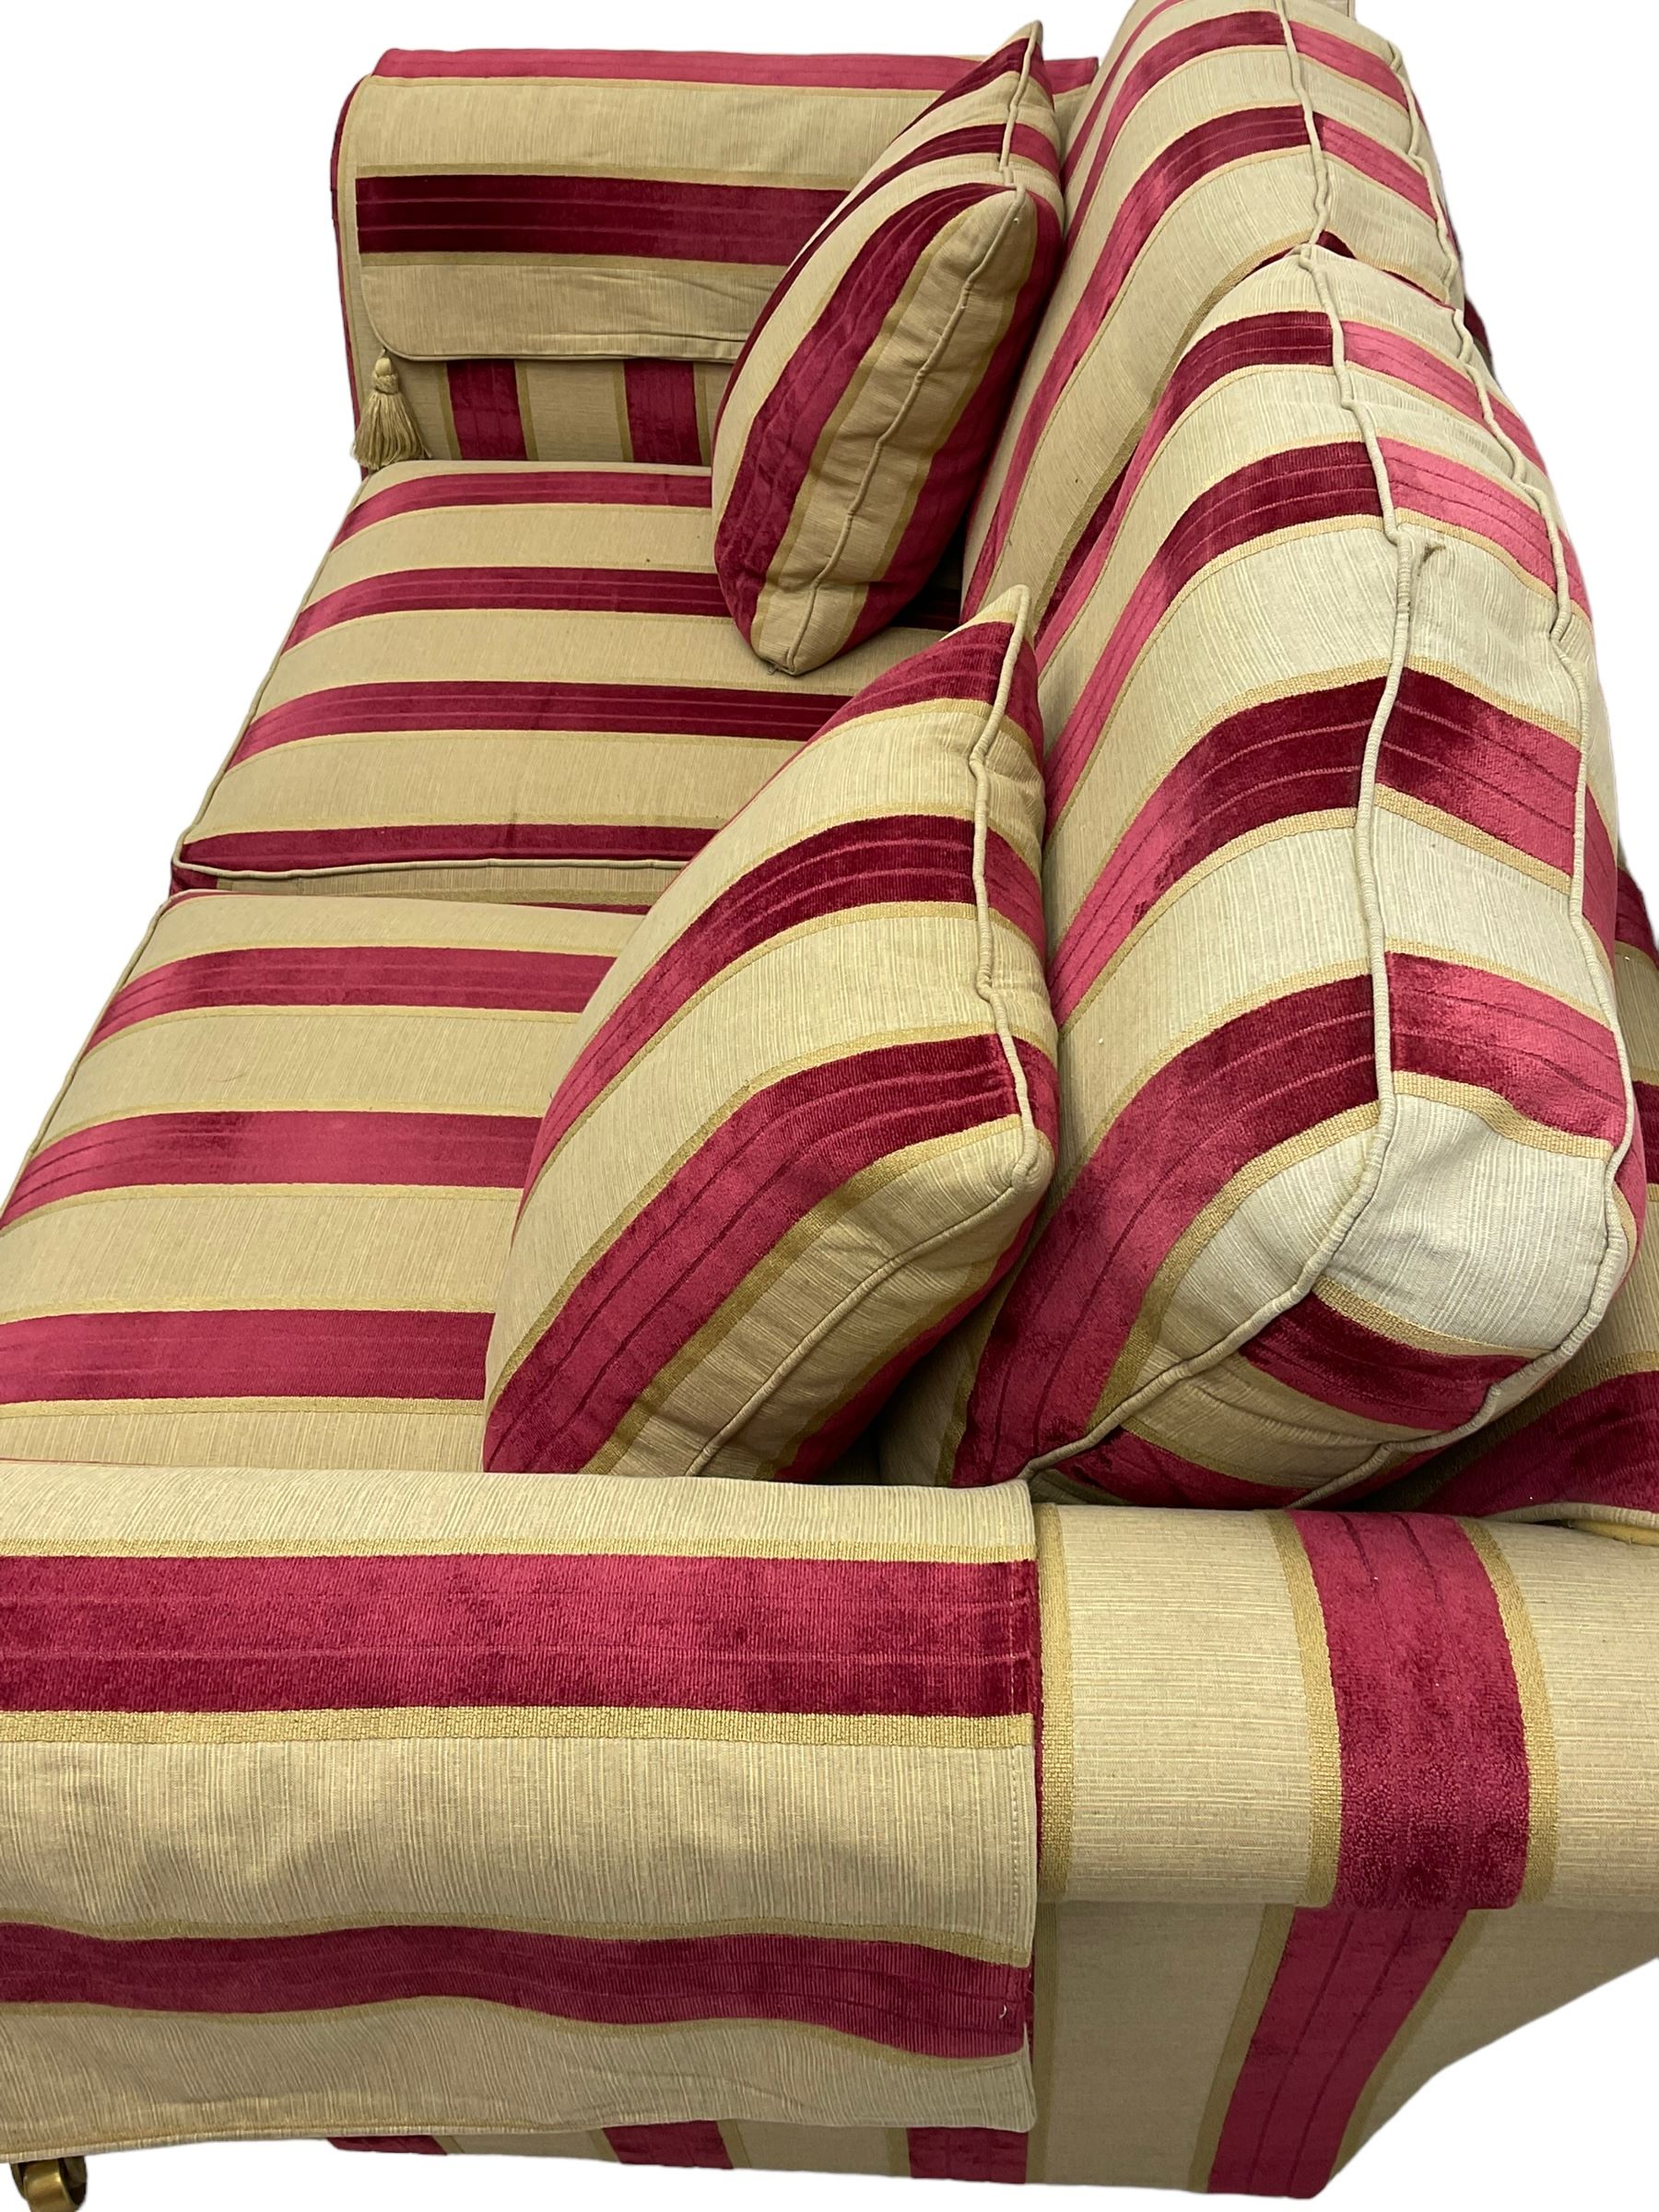 Three-piece lounge suite - large two-seat sofa upholstered in red and gold striped fabric (W185cm - Bild 22 aus 24